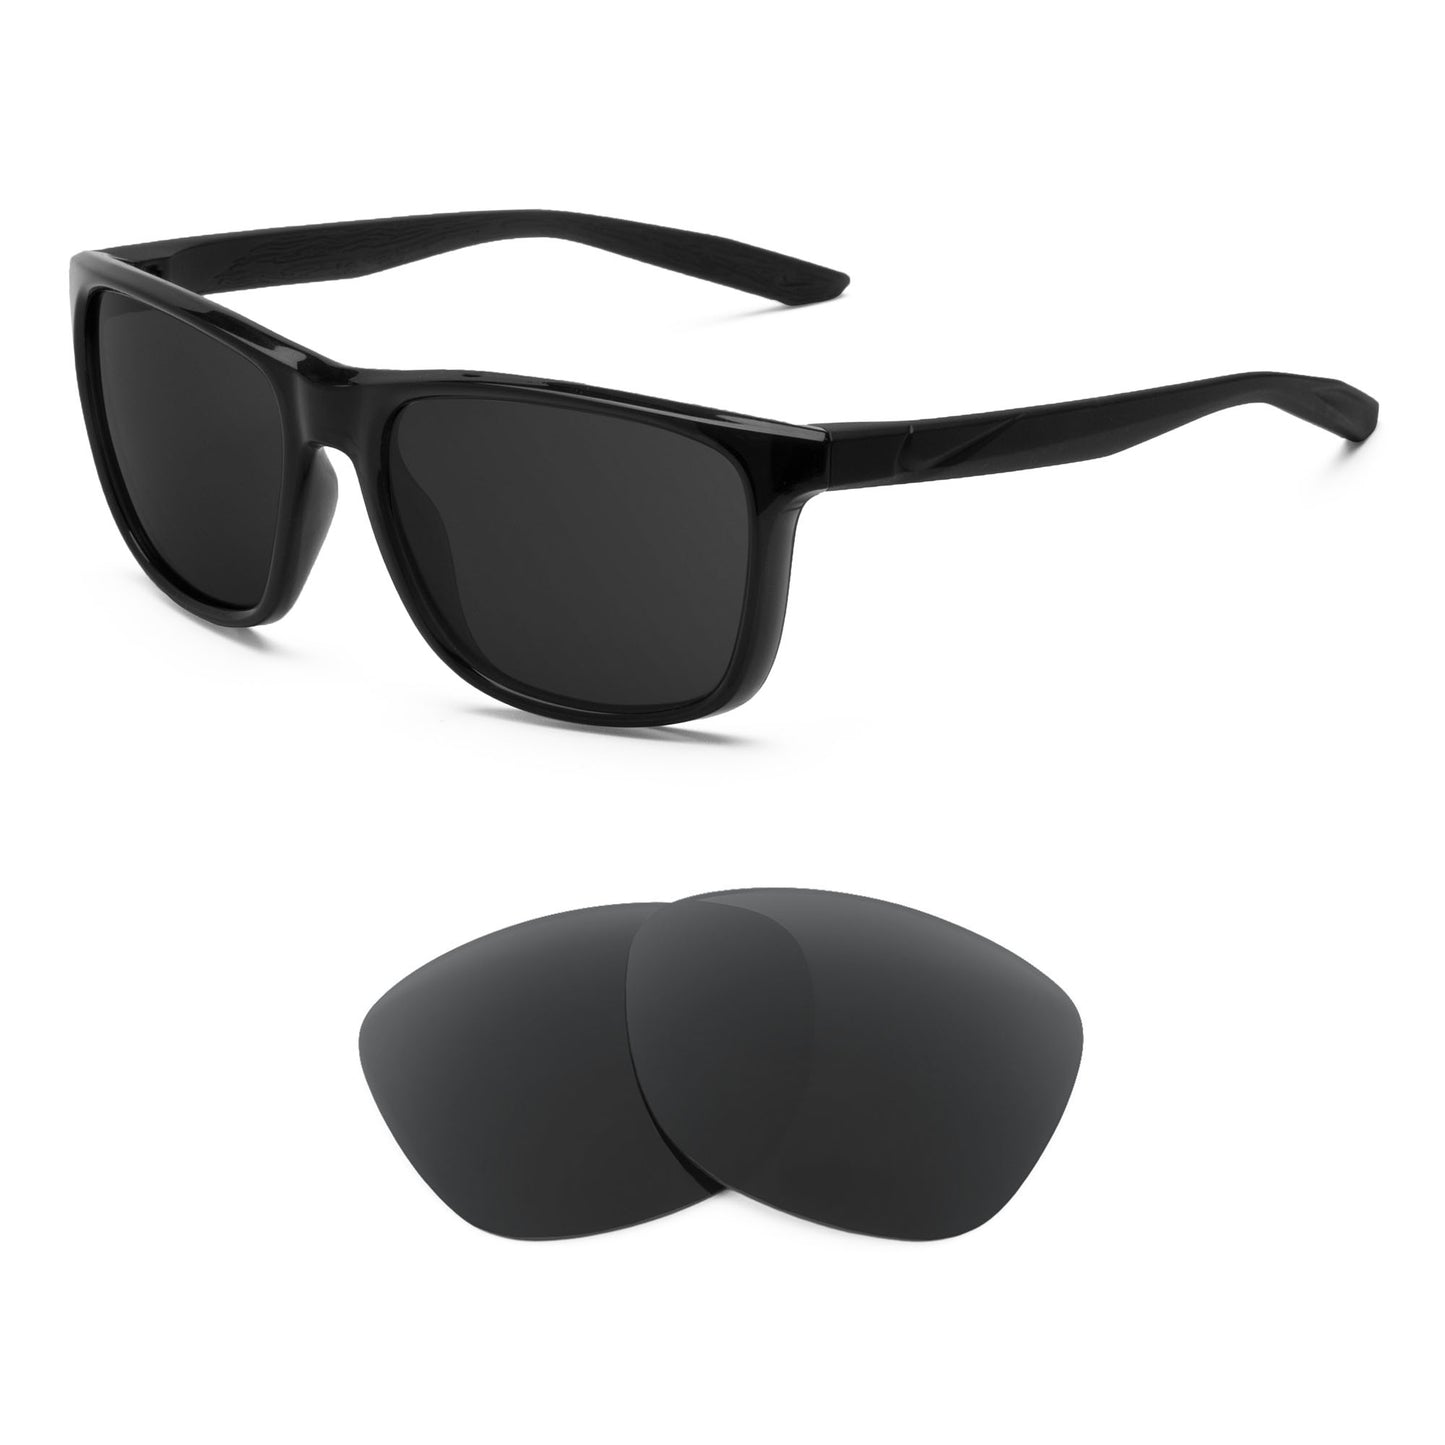 Nike Flip Ascent sunglasses with replacement lenses